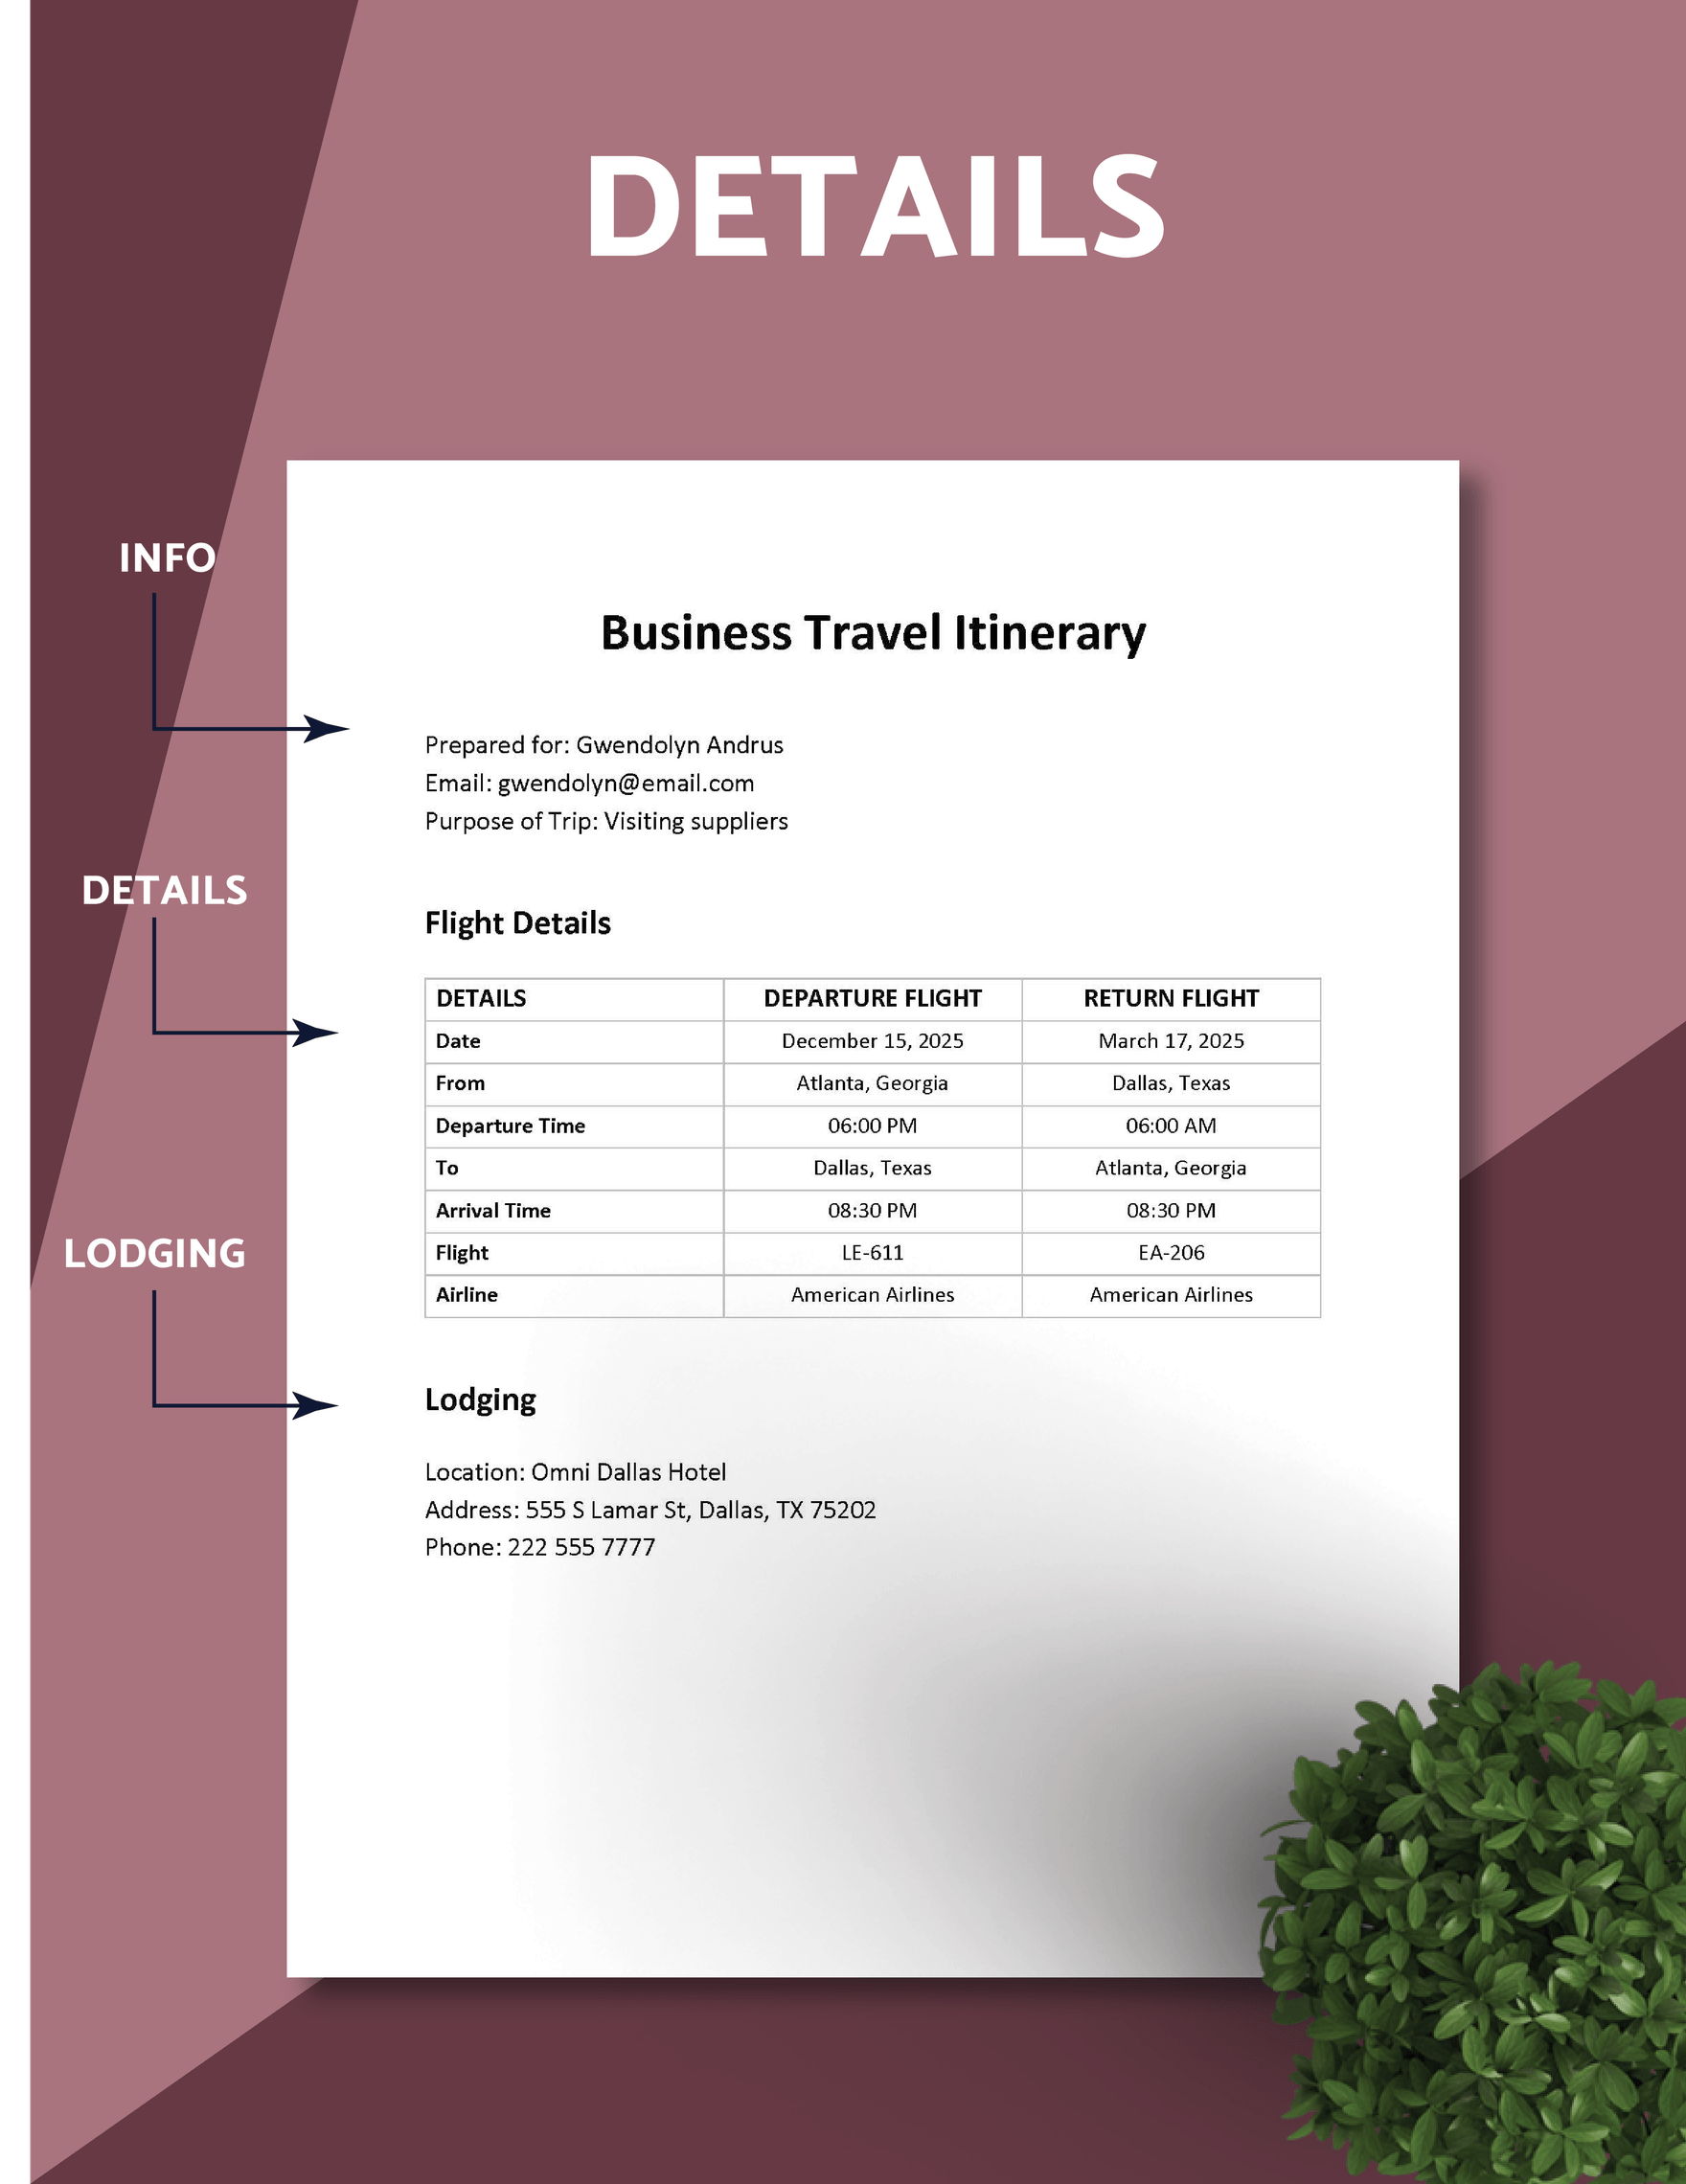 Business Travel Itinerary Document Template